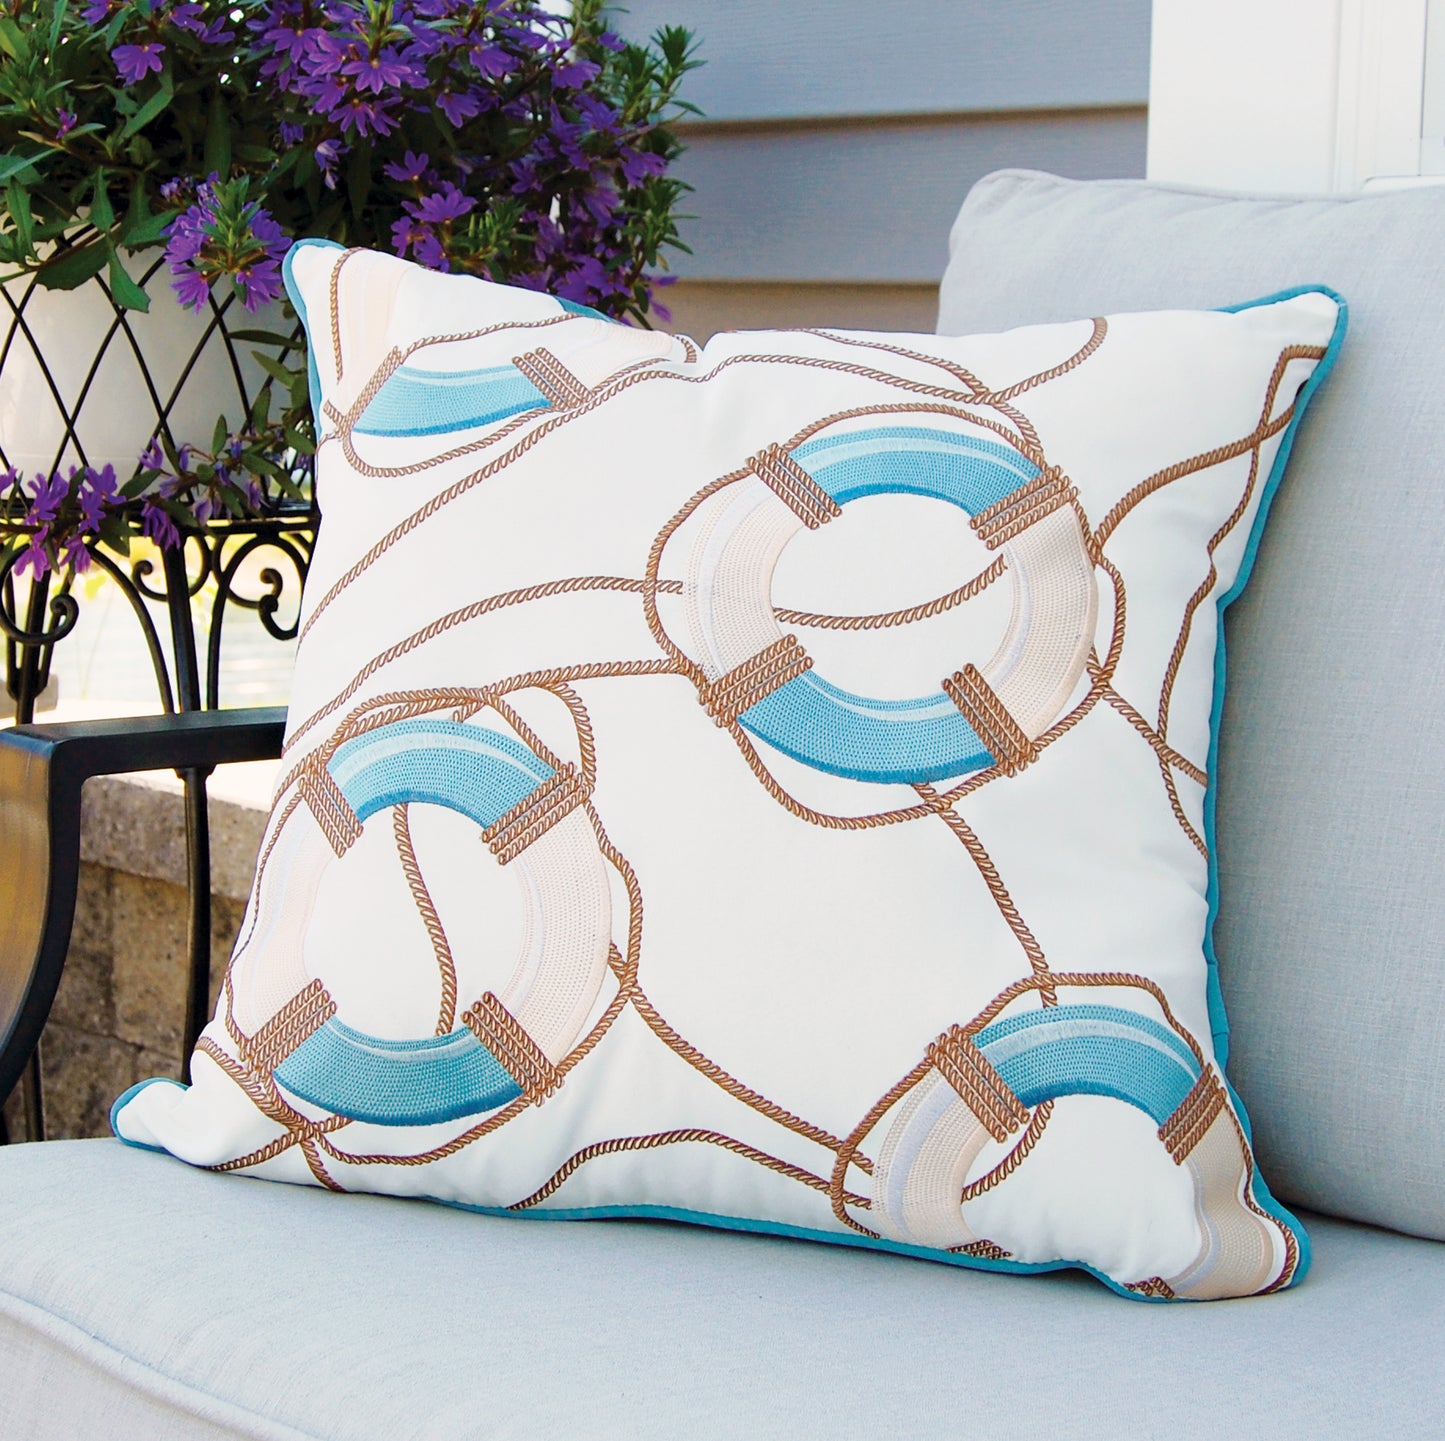 The Lake Preserver and Rope Outdoor Pillow is styled on an outdoor chair.